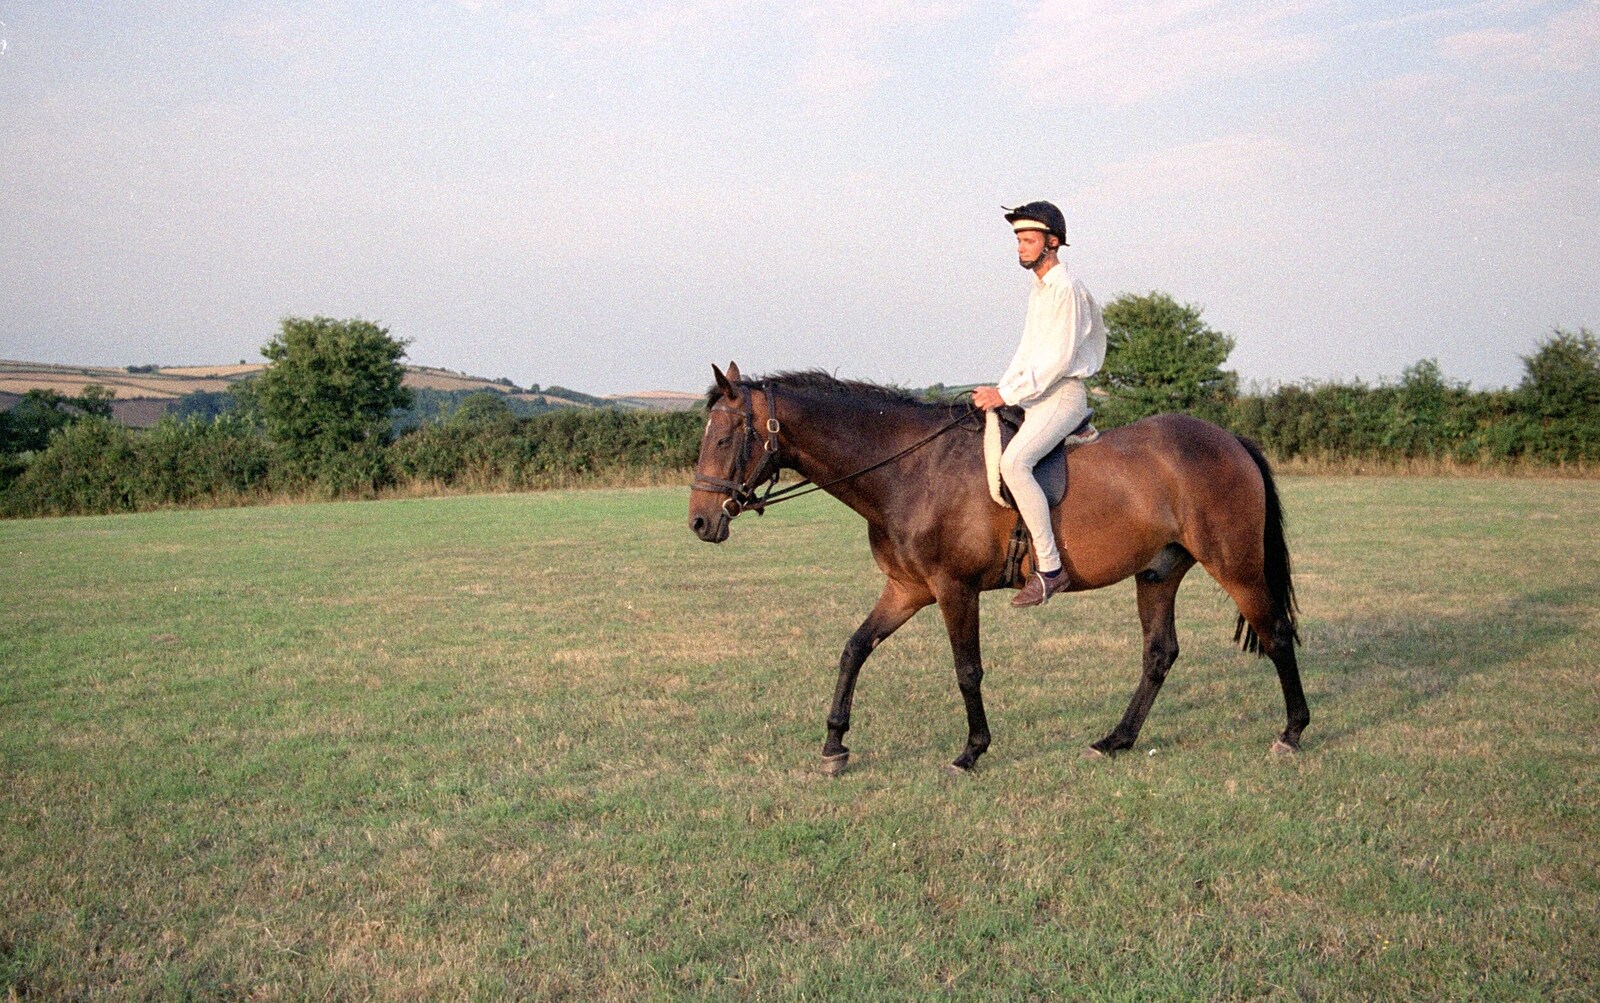 Dressage at the Horse of the Year Show from Summer Days on Pitt Farm, Harbertonford, Devon - 17th July 1989